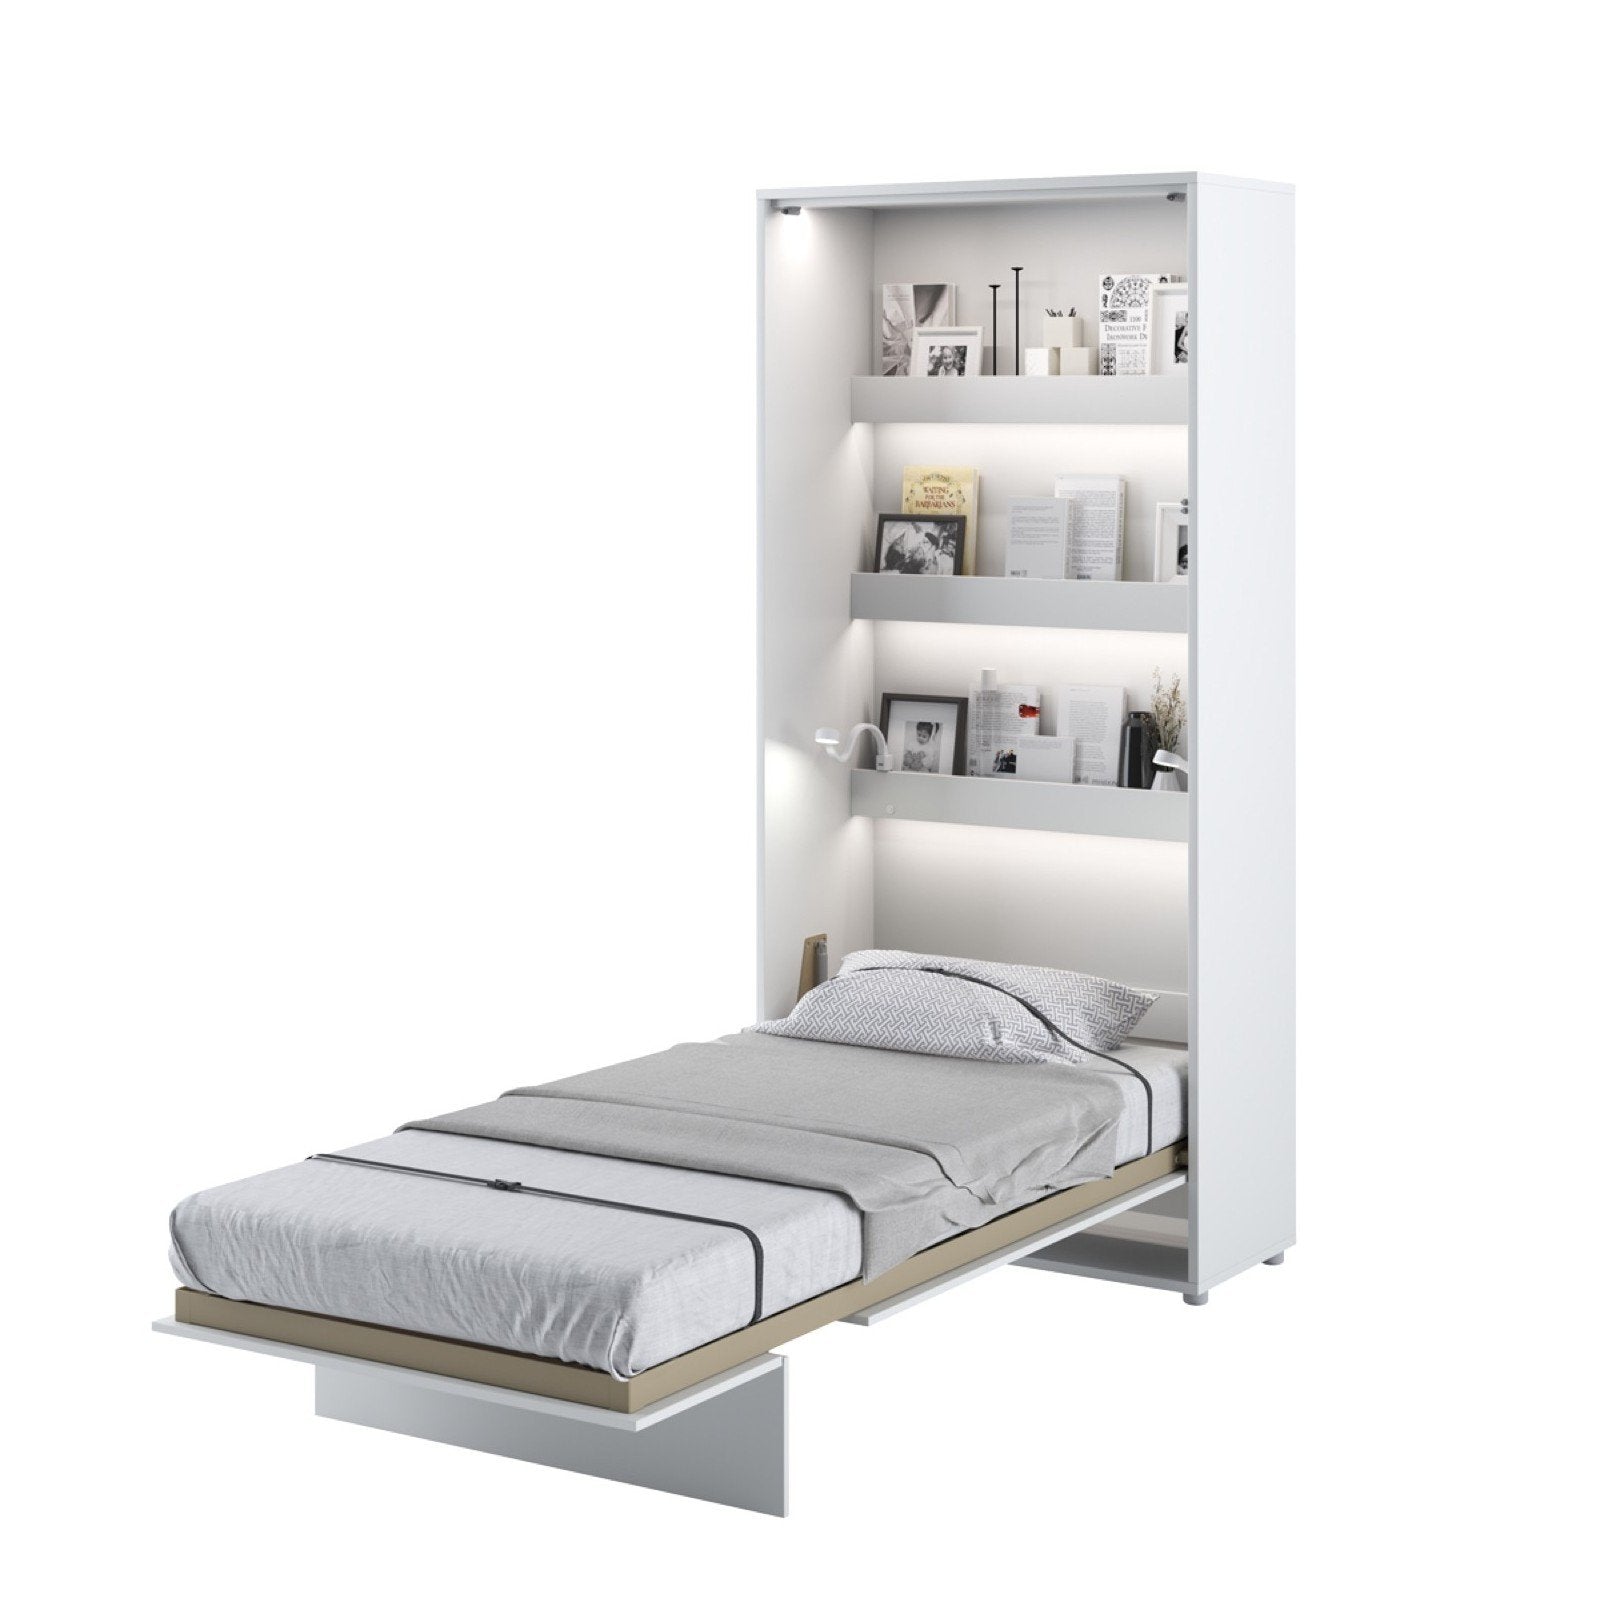 View BC03 Vertical Wall Bed Concept 90cm Murphy Bed White Gloss 90 x 200cm information